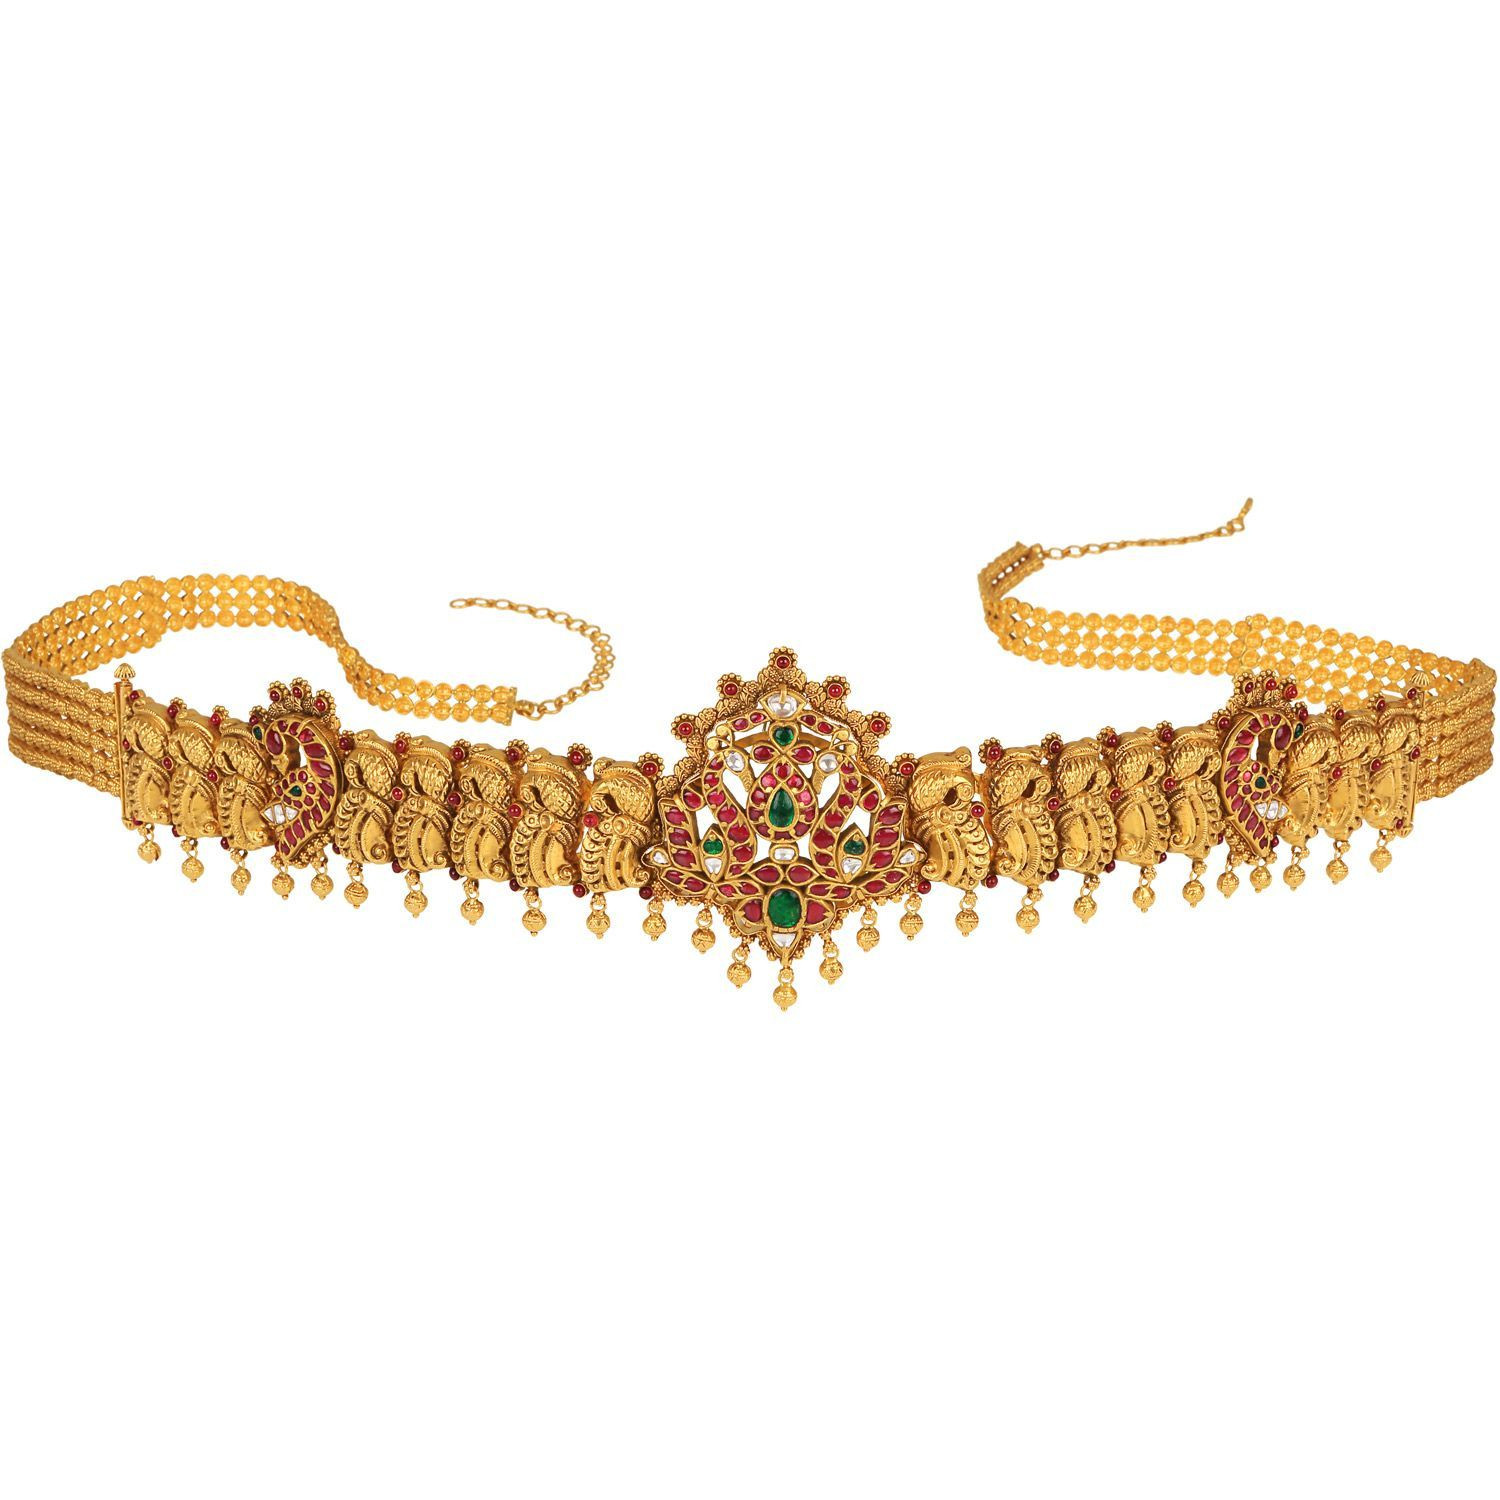 Antique Chain Vaddanam By Asp Fashion Jewellery – 𝗔𝘀𝗽 𝗙𝗮𝘀𝗵𝗶𝗼𝗻  𝗝𝗲𝘄𝗲𝗹𝗹𝗲𝗿𝘆